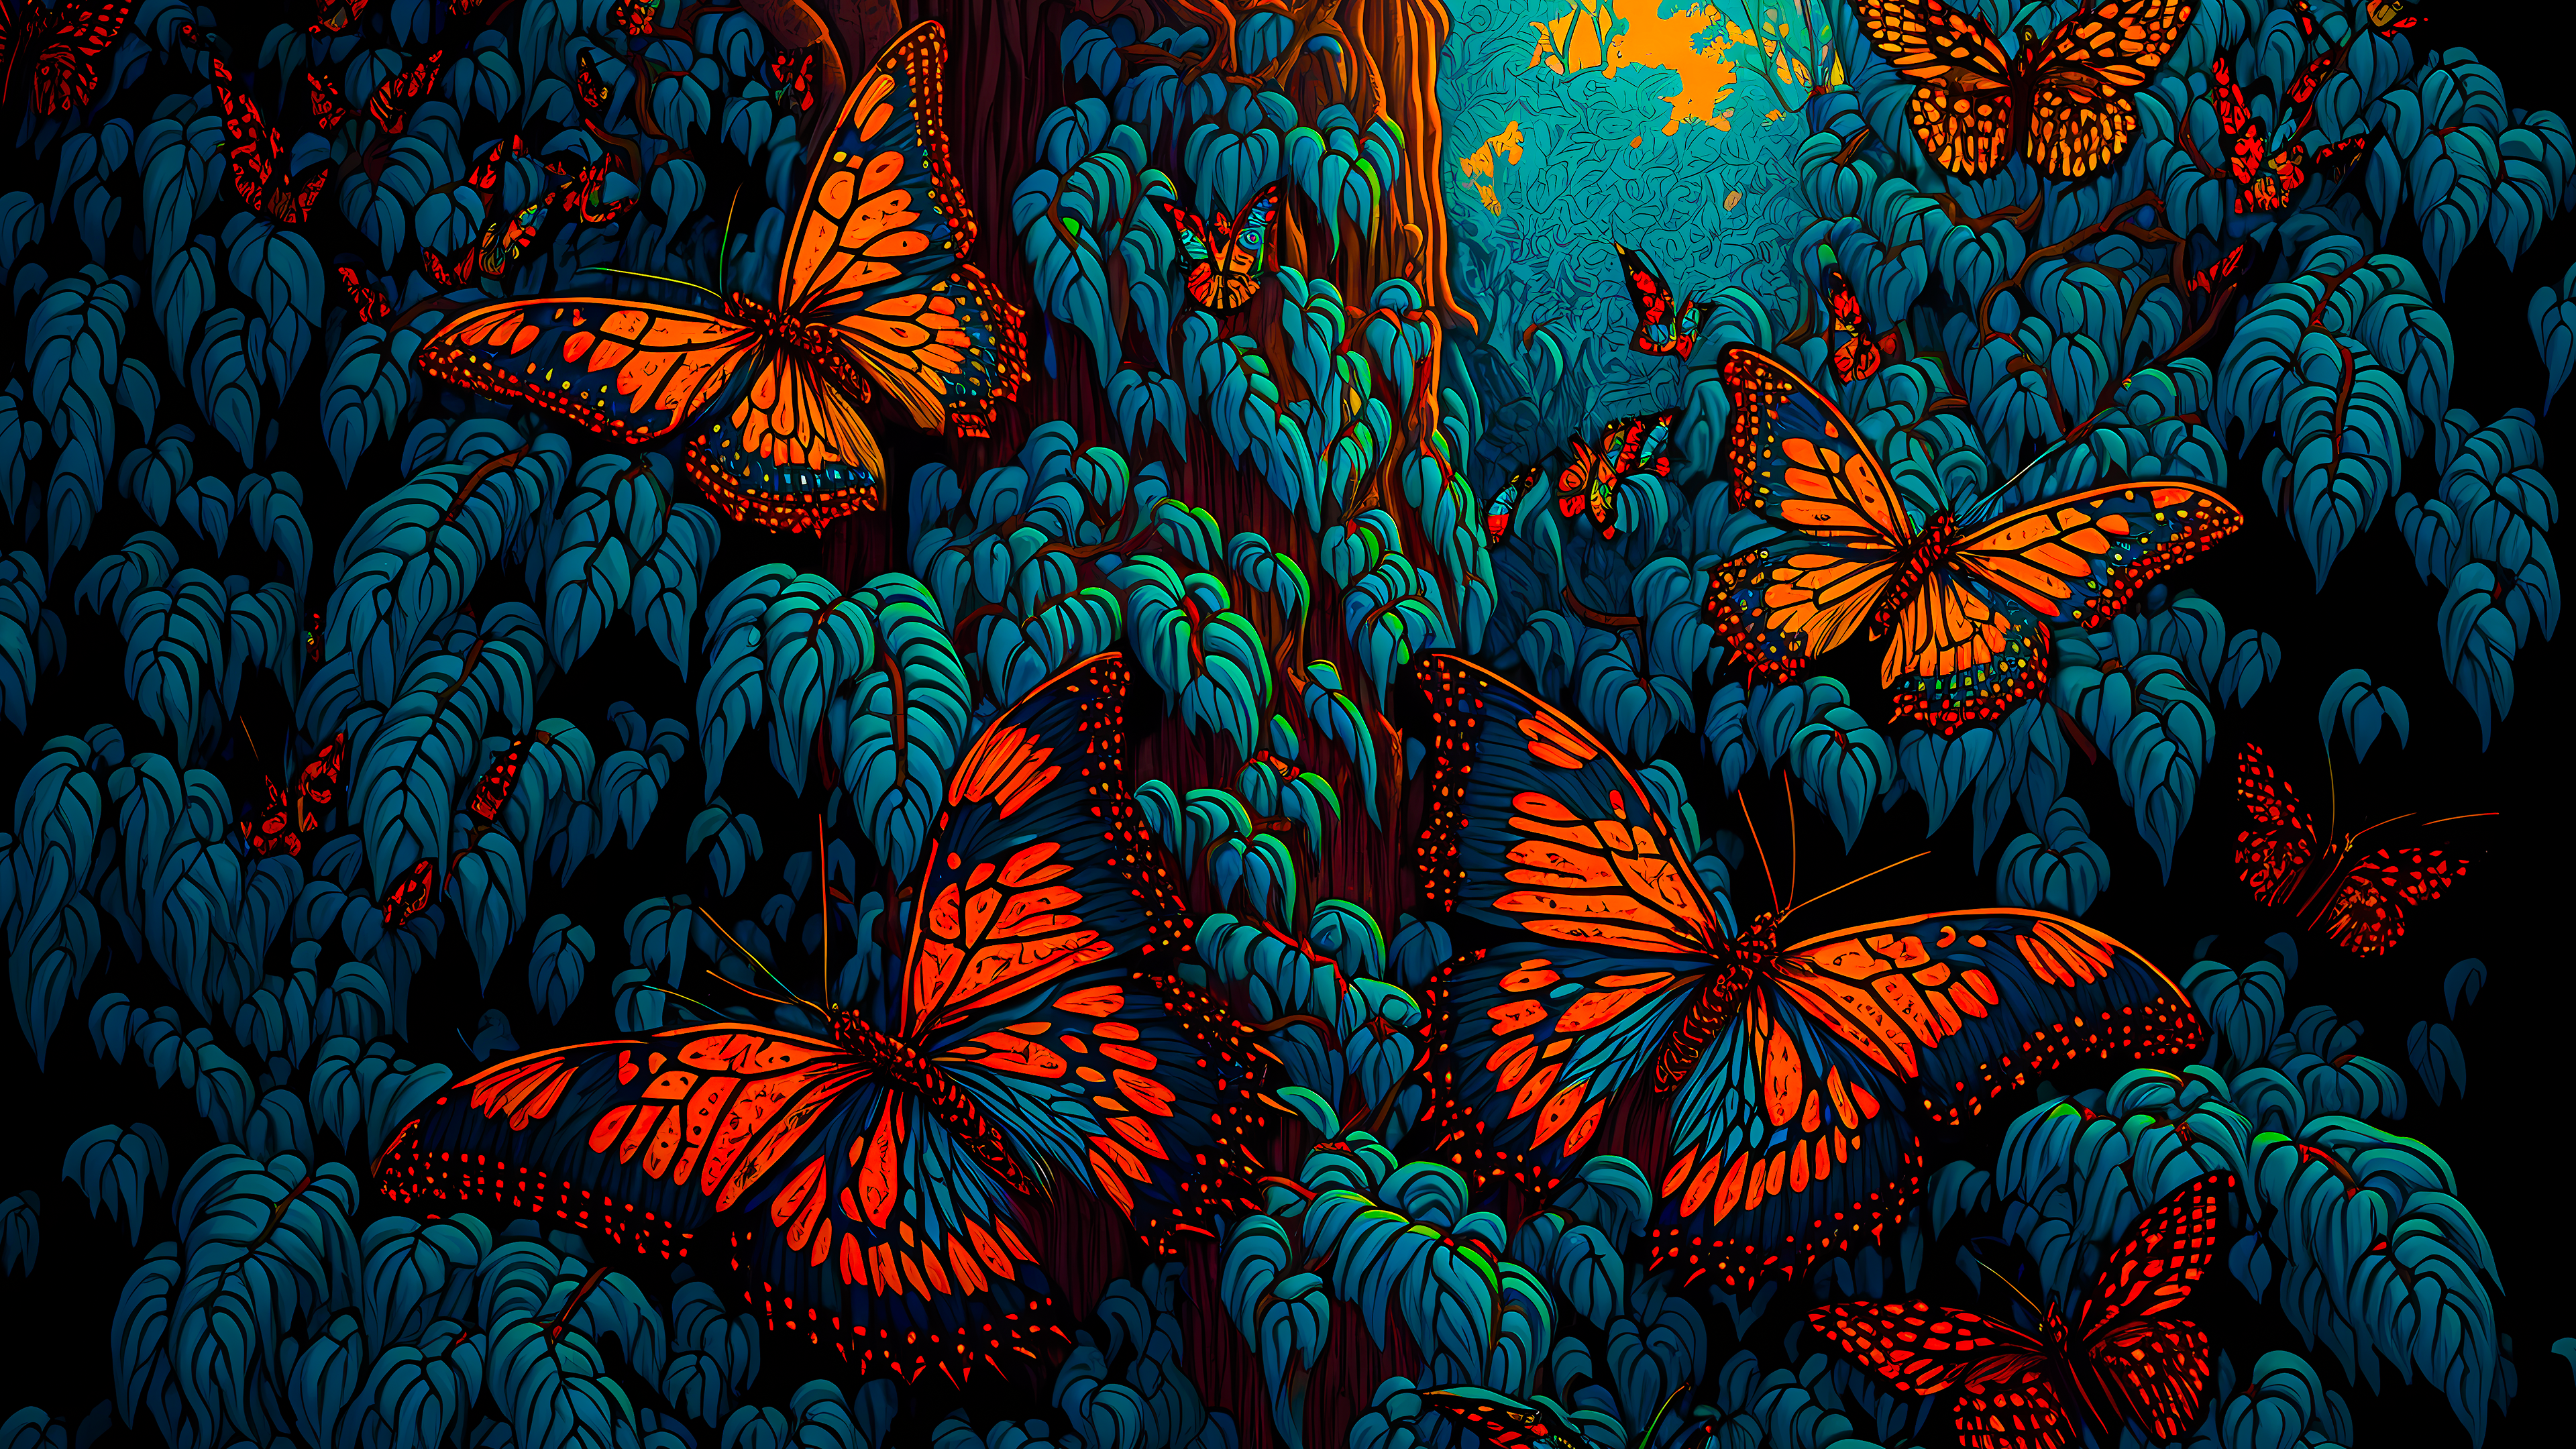 4k wallpaper for PC: Beautiful forest butterfly illustration